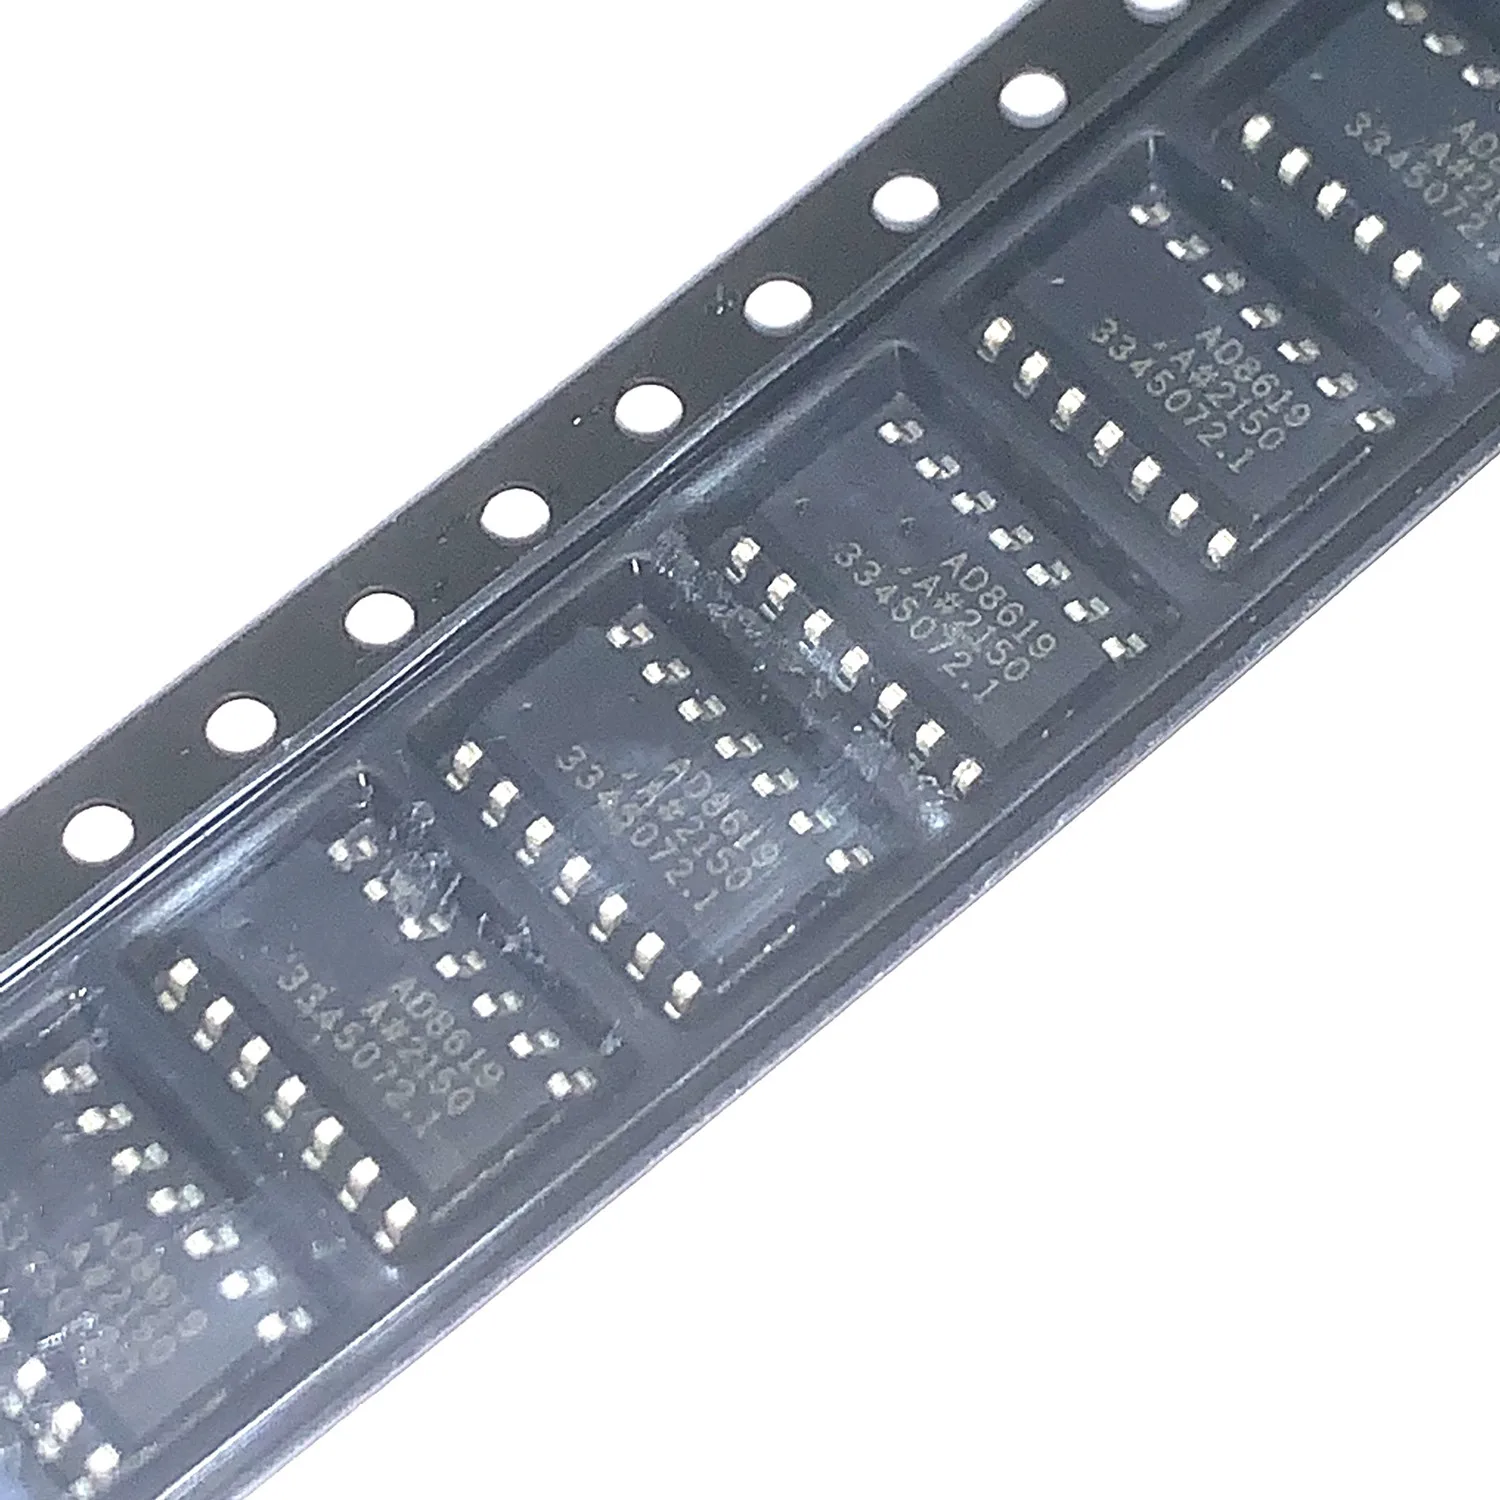 10PCS AD8619ARZ AD8619  SOP14 Low Cost Micropower, Low Noise CMOS Rail-to- Rail, Input/Output Operational Amplifiers opa353 module high speed broadband op amps rail to rail operational amplifiers voltage amplifiers in phase amplifiers